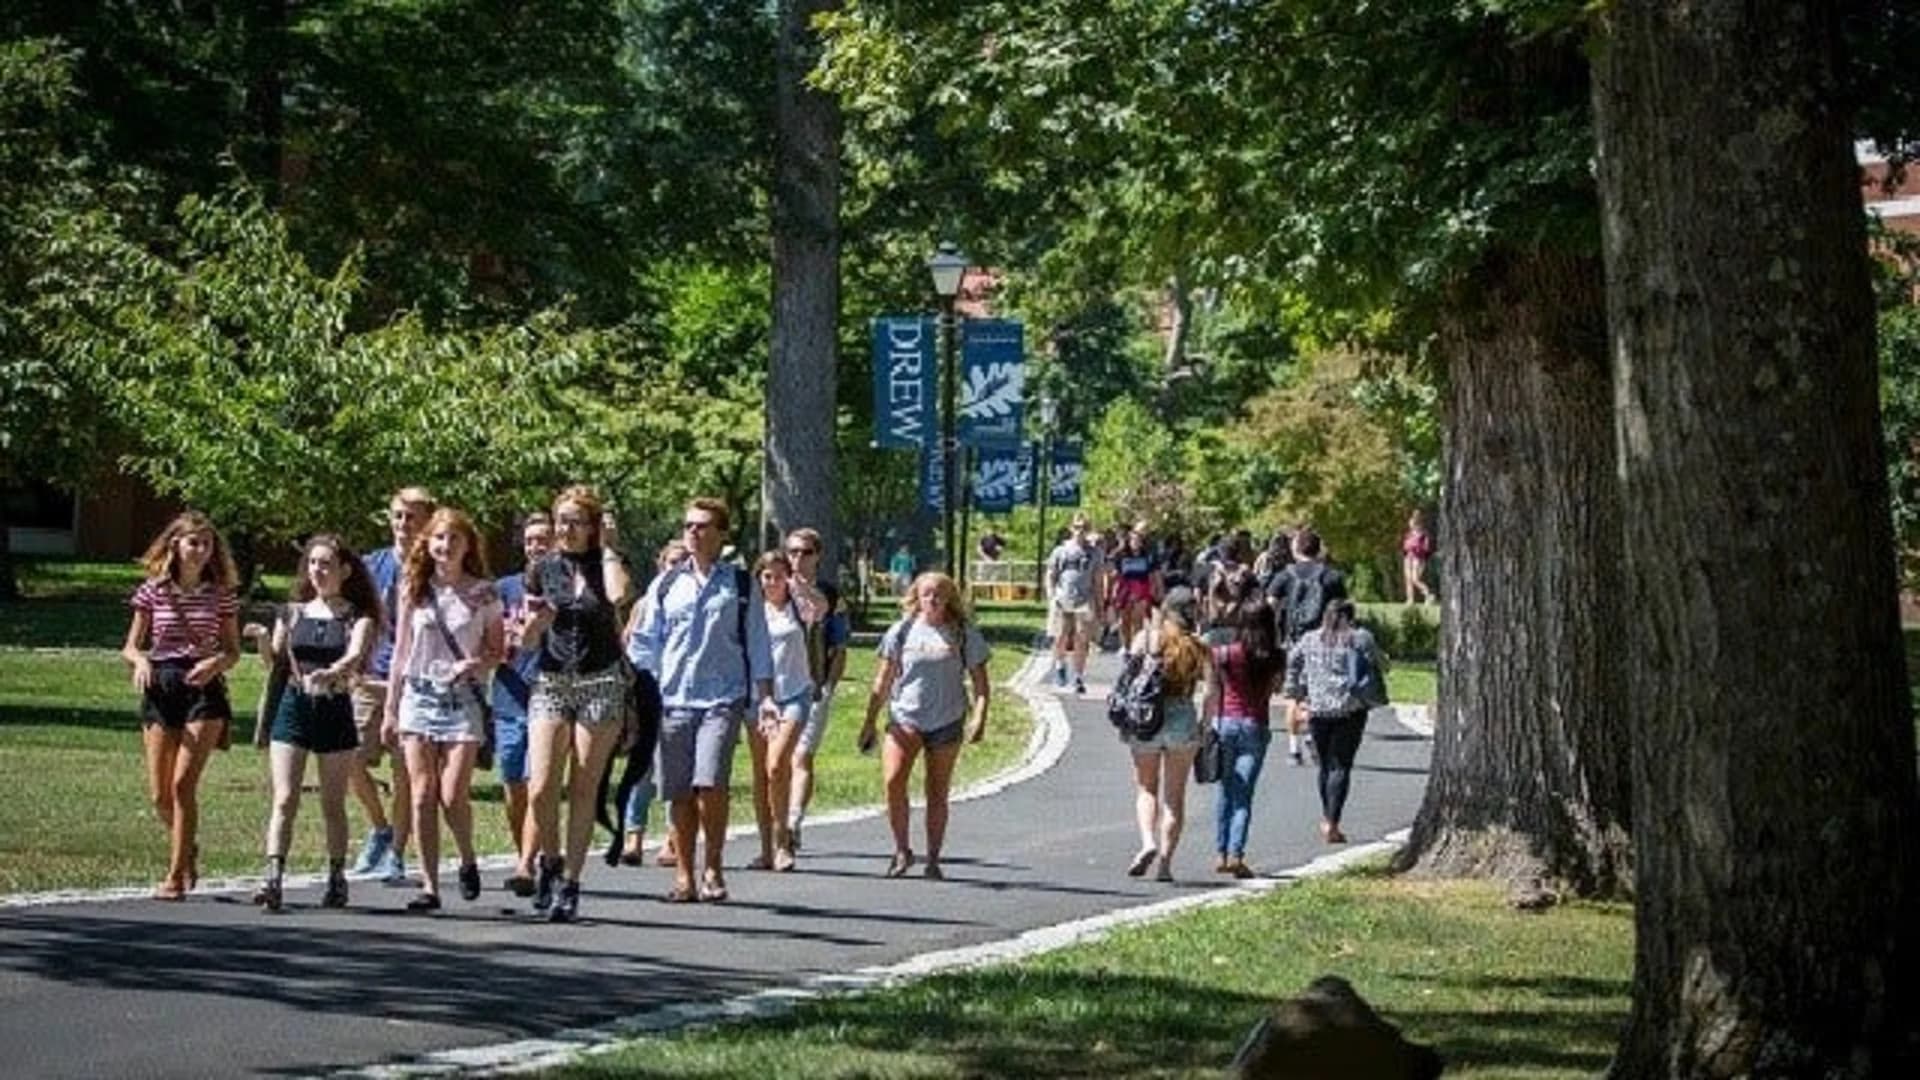 Drew University cuts tuition by 20 percent